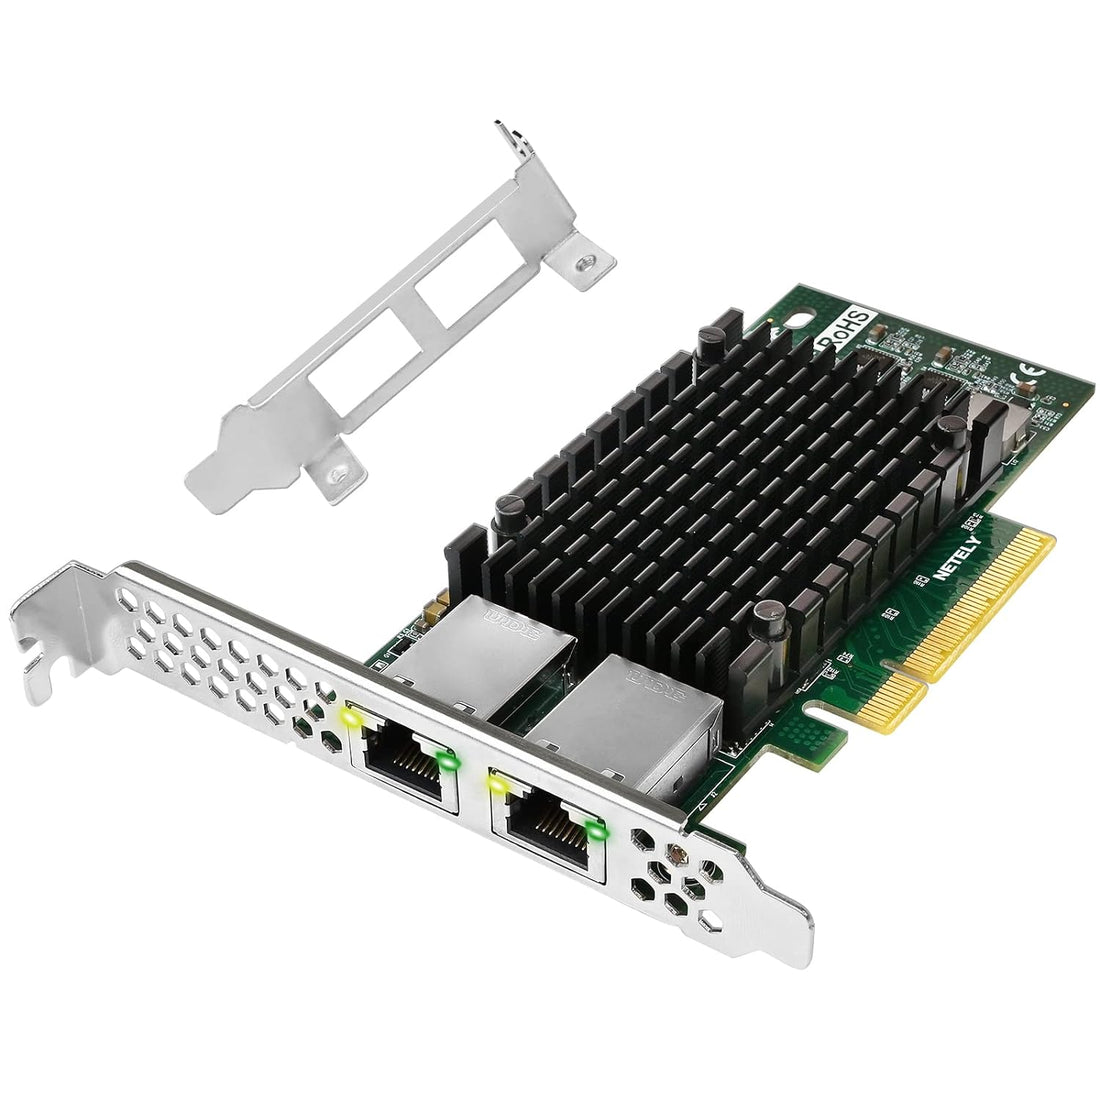 NETELY PCIE X8 to 2X 10GbE Network Adapter, 2X 10Gbps RJ45 Ports, PCIE X8 Lane, Intel X540-AT2 Converged Ethernet Controller, 10GbE PCIE NIC Adapter for Windows and Linux Desktop PCs (X540T2)